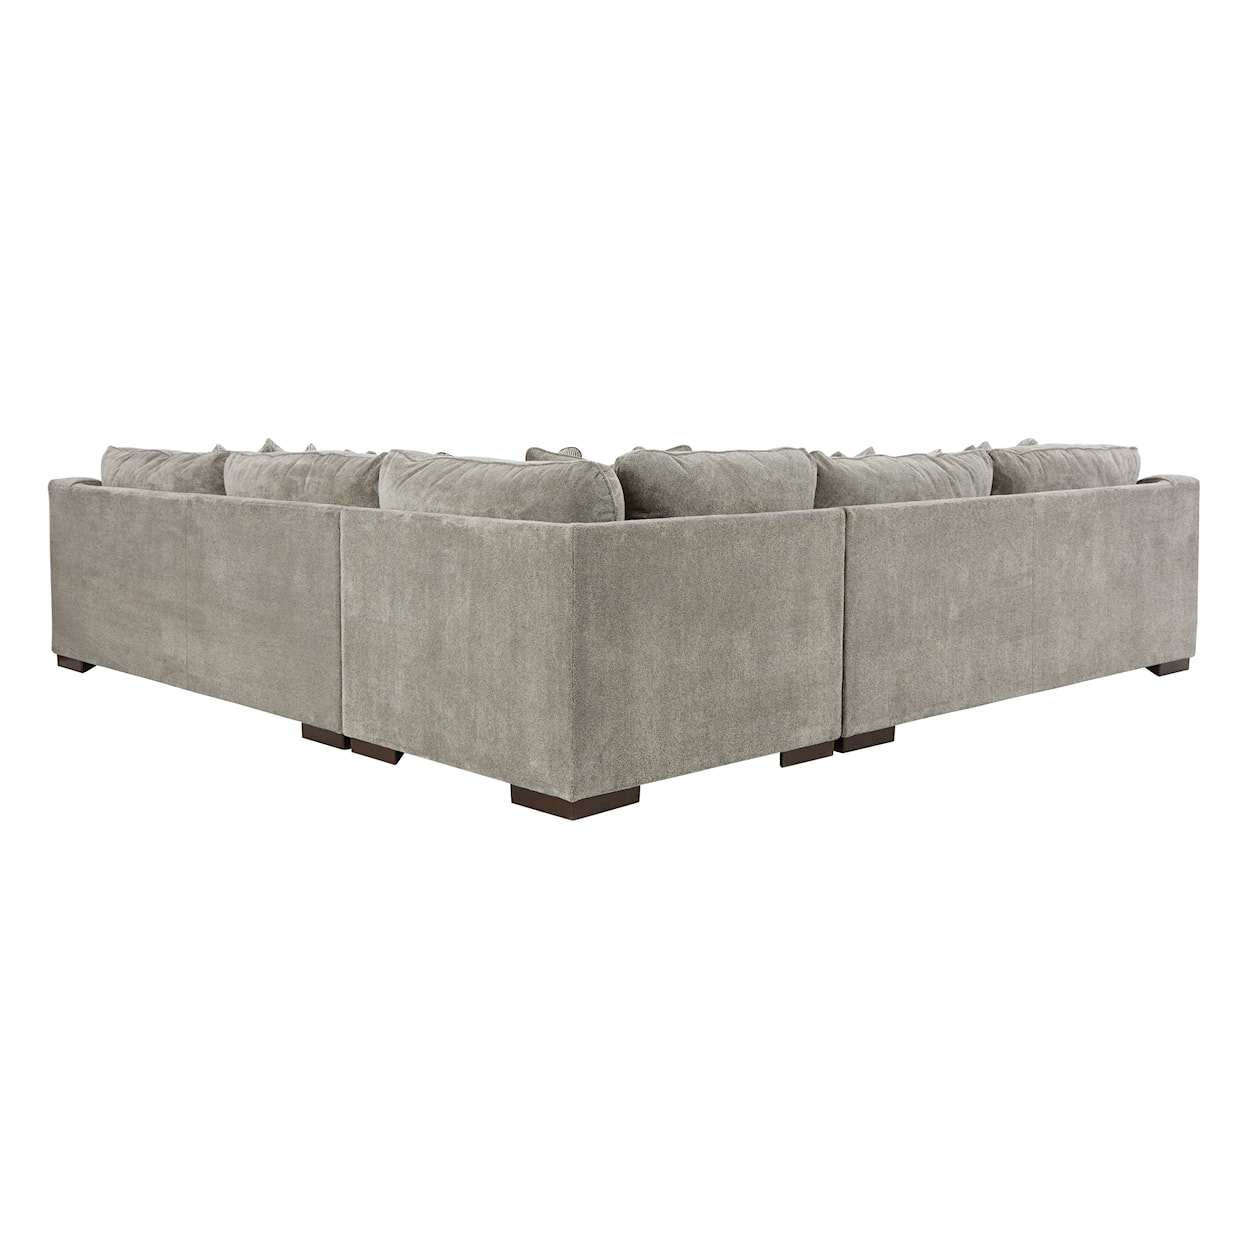 Signature Design by Ashley Bayless 3-Piece Sectional Sofa